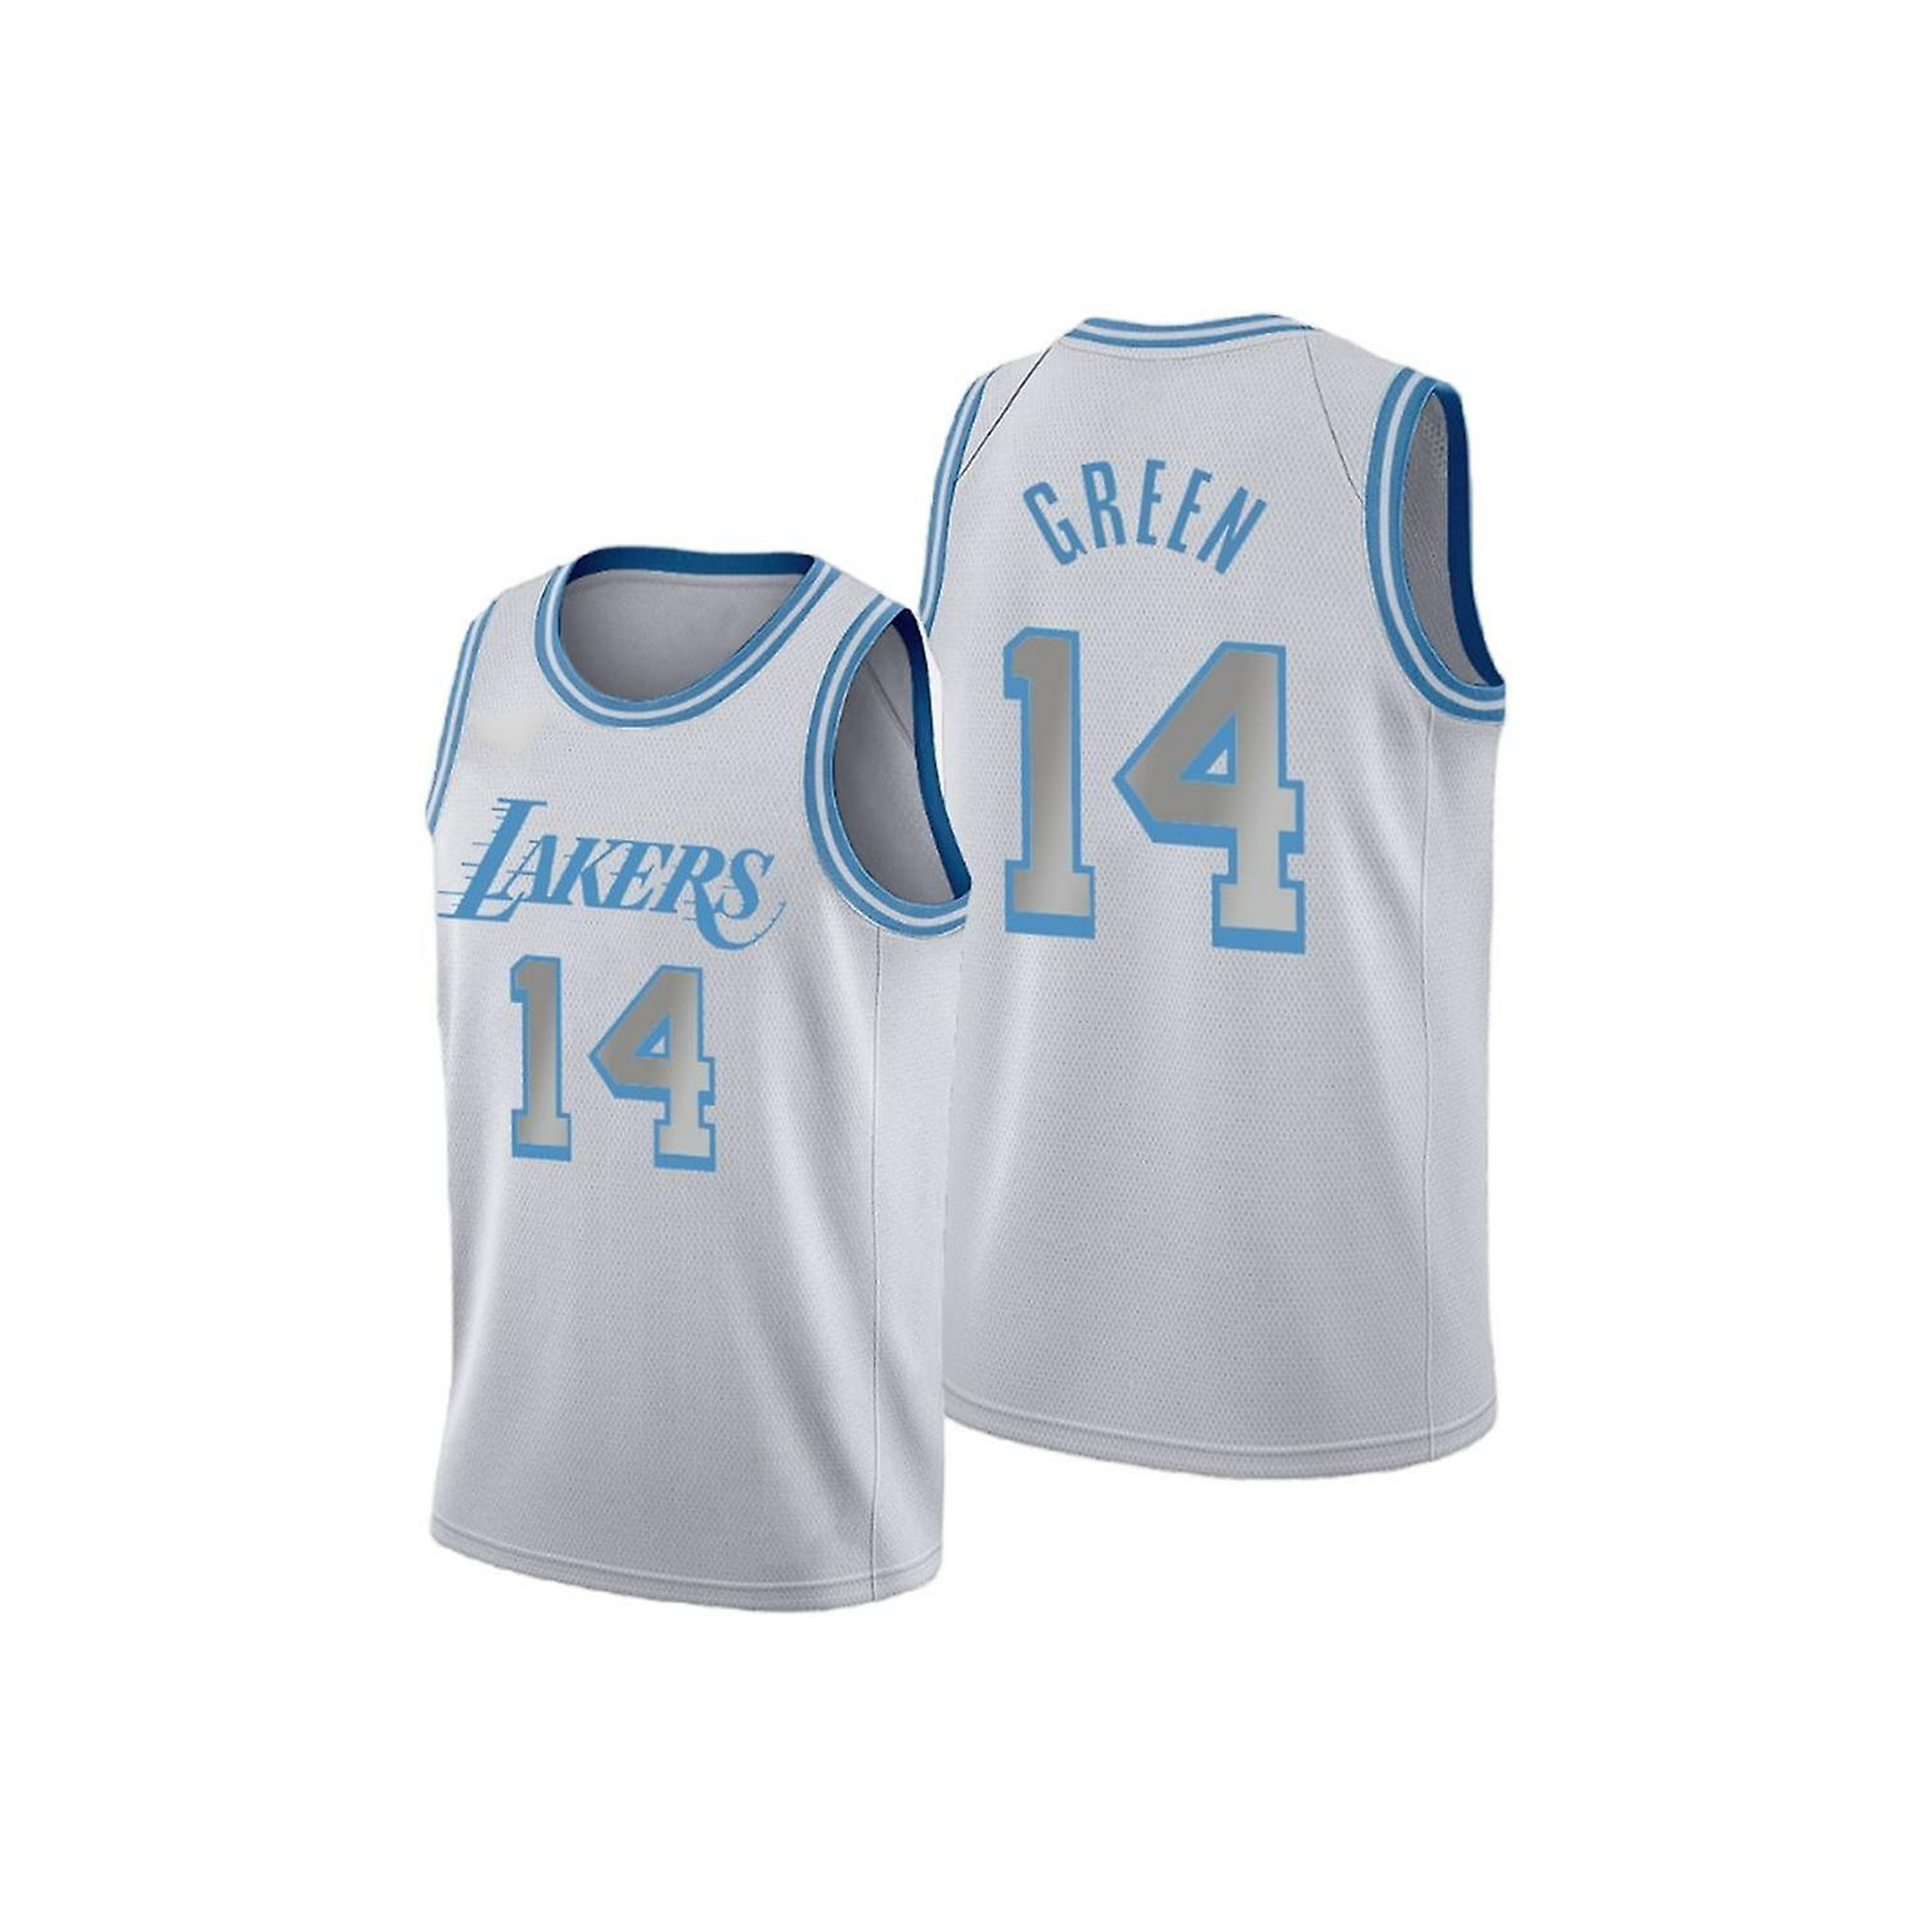 Los Angeles Lakers No. 14 Danny Green Jersey